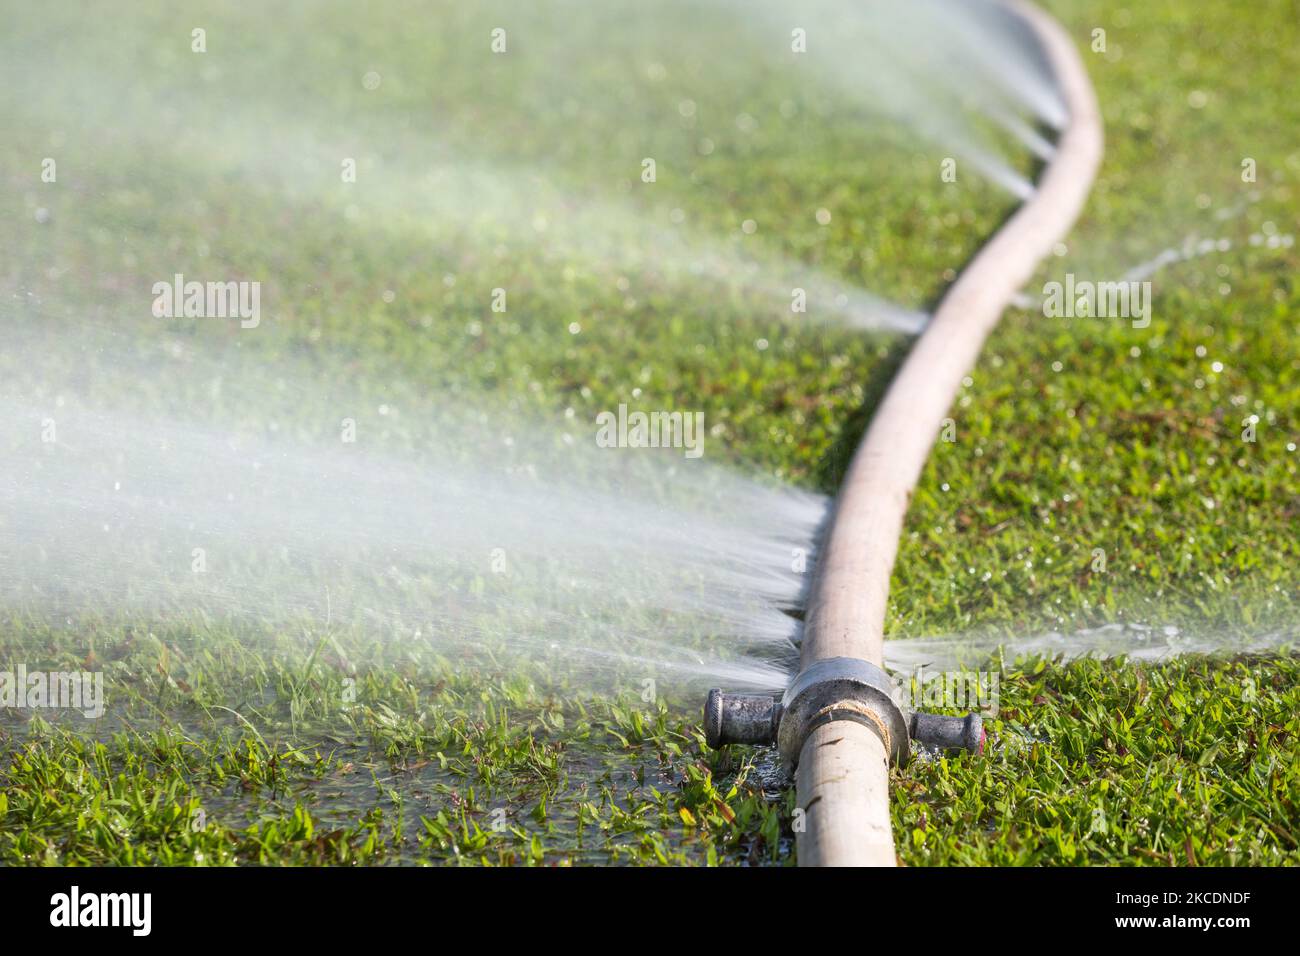 wasting water - water leaking from hole in a hose Stock Photo